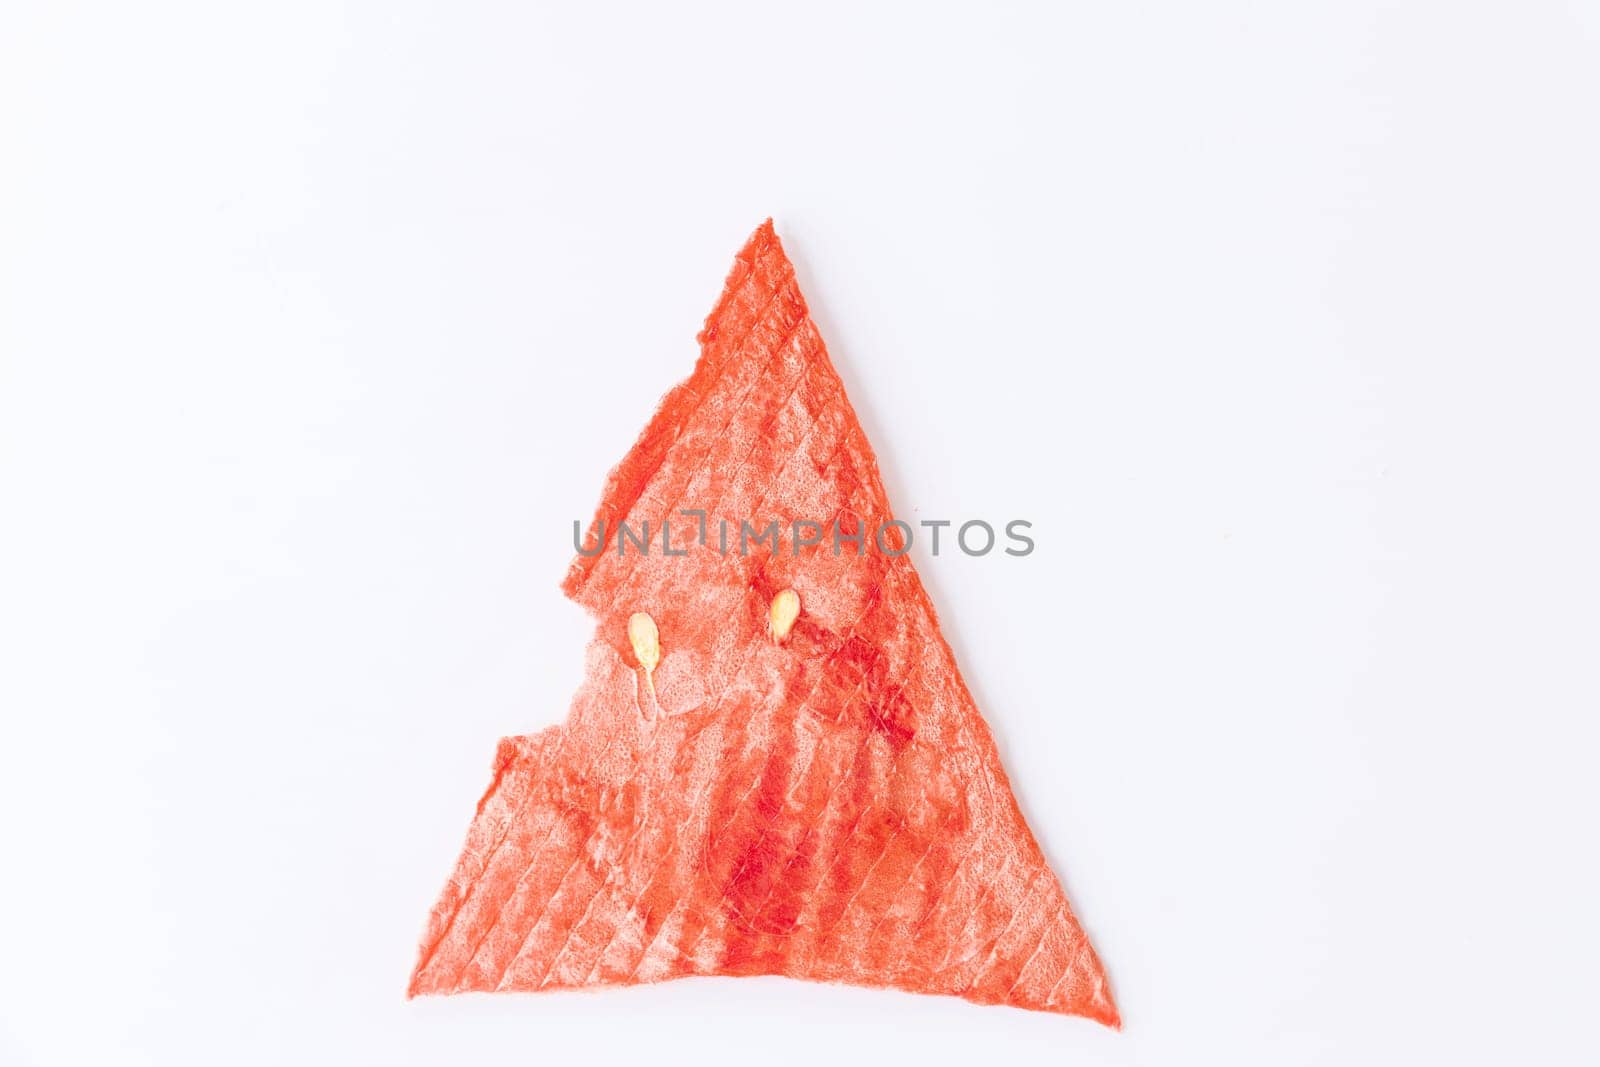 triangular slice of dried red, ripe watermelon. fruit chips on a white background. healthy sweets concept, diet, isolate, top view